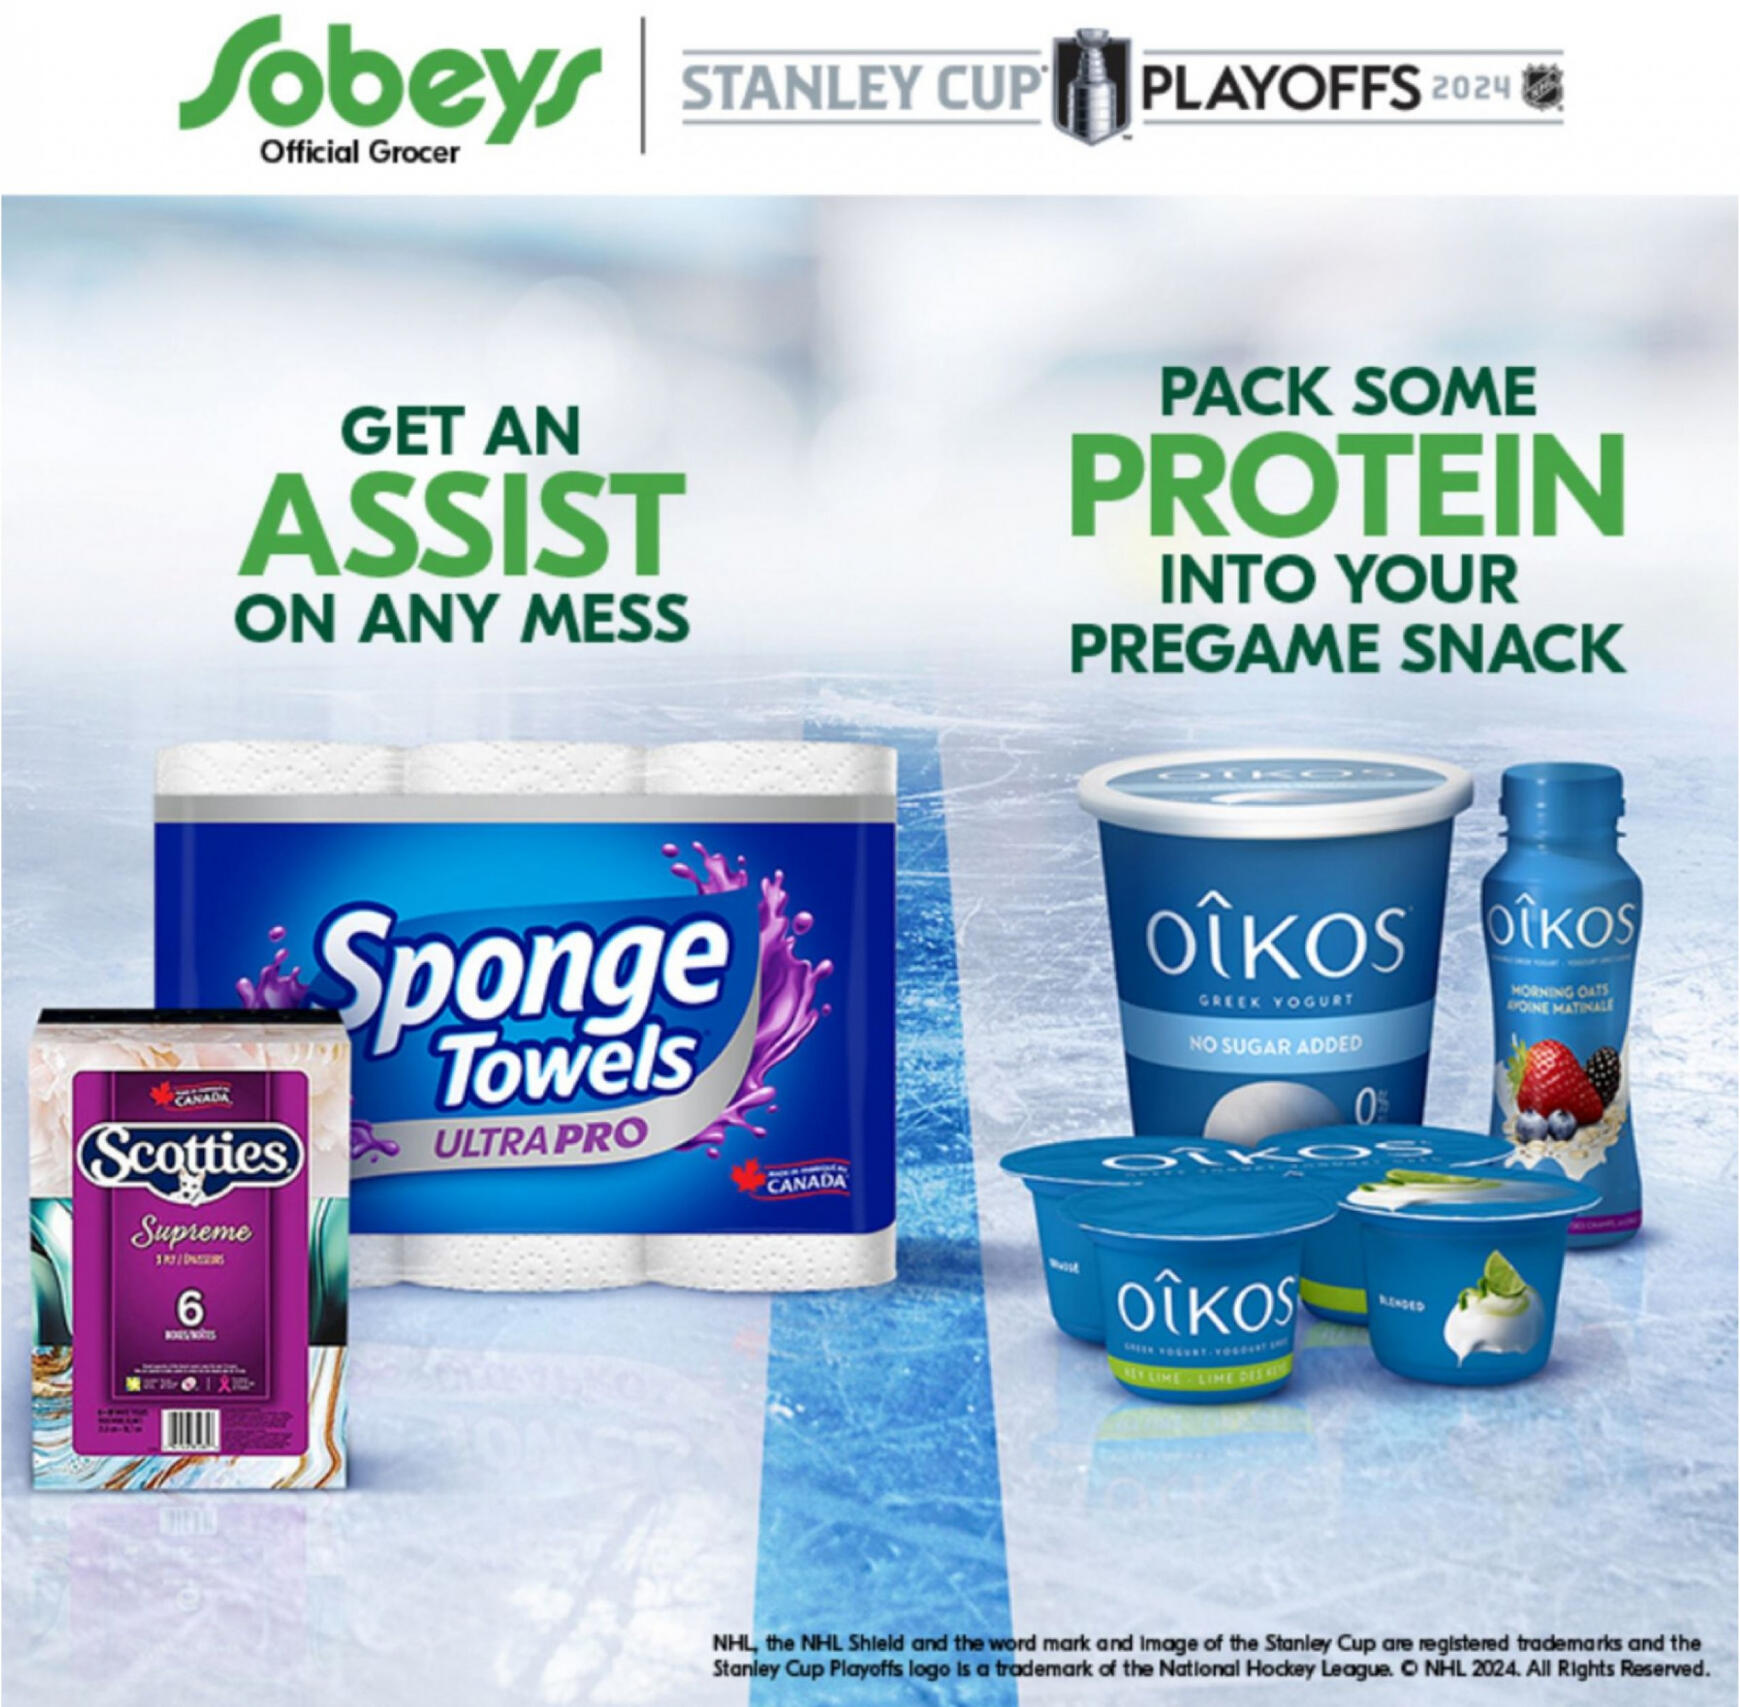 sobeys - Sobeys - Weekly Flyer - Ontario flyer current 23.05. - 29.05. - page: 21